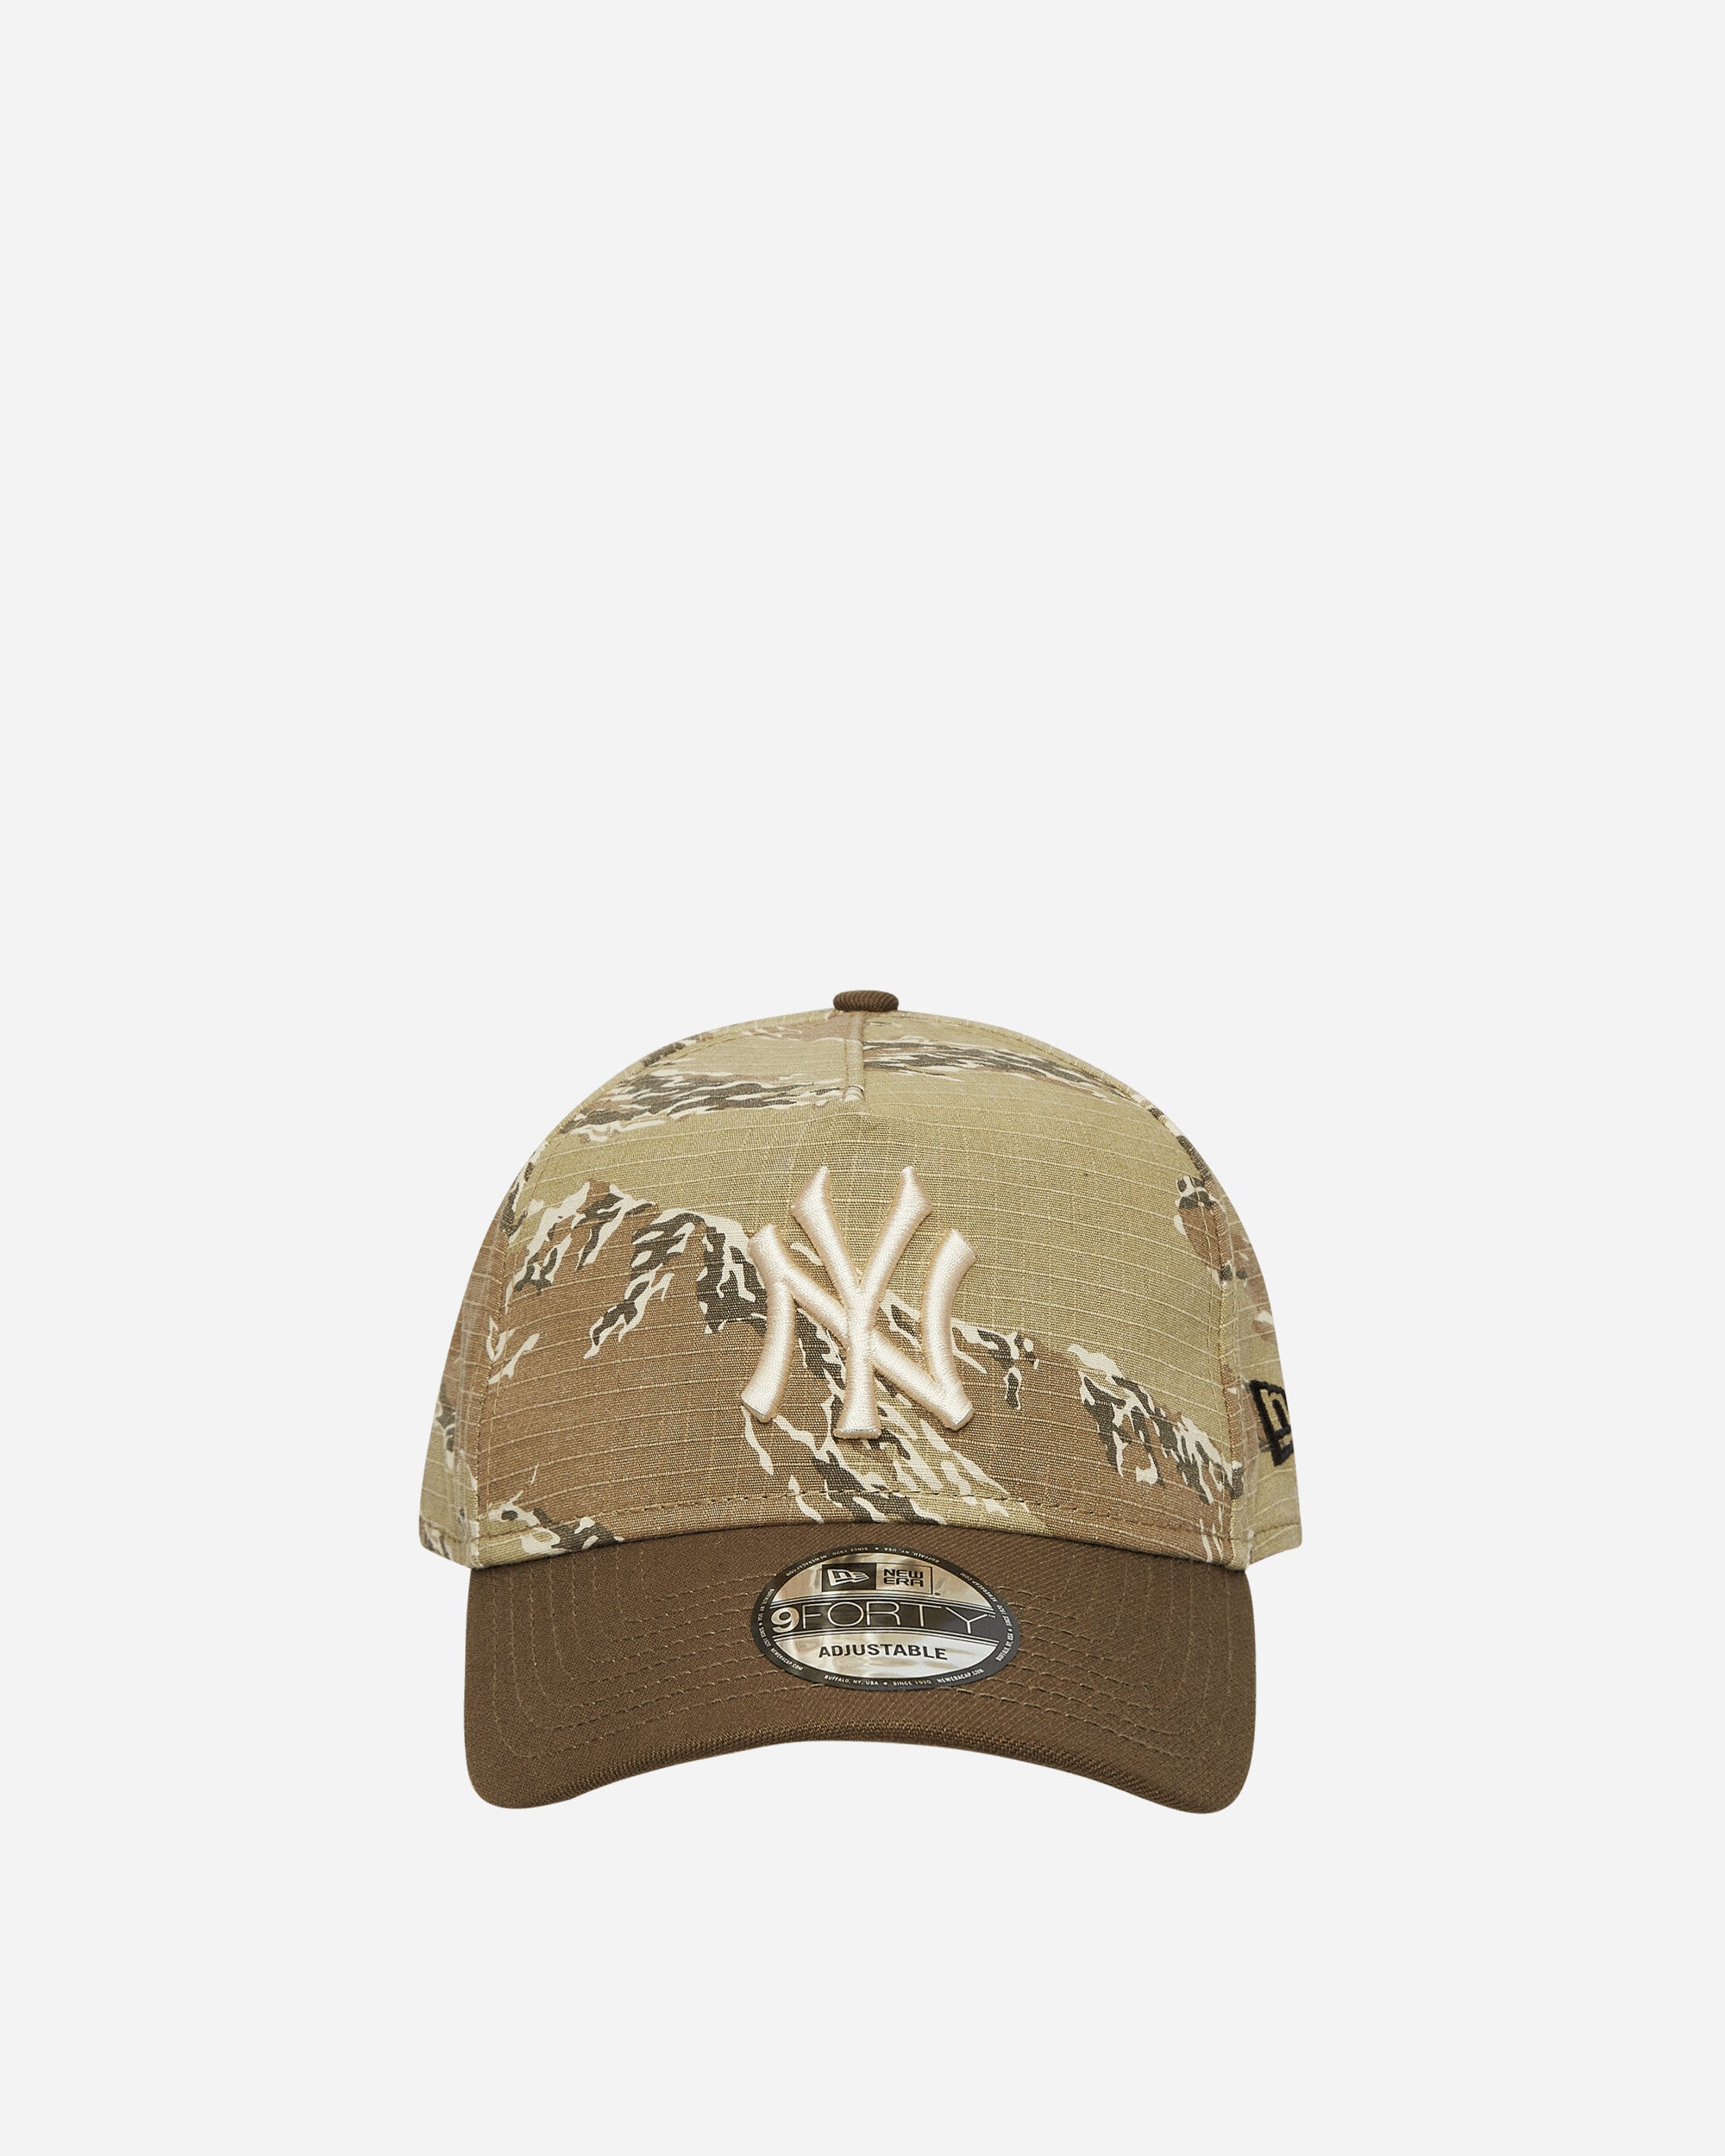 New York Yankees 9FORTY A-Frame Adjustable Cap Two-Tone Tiger Camo